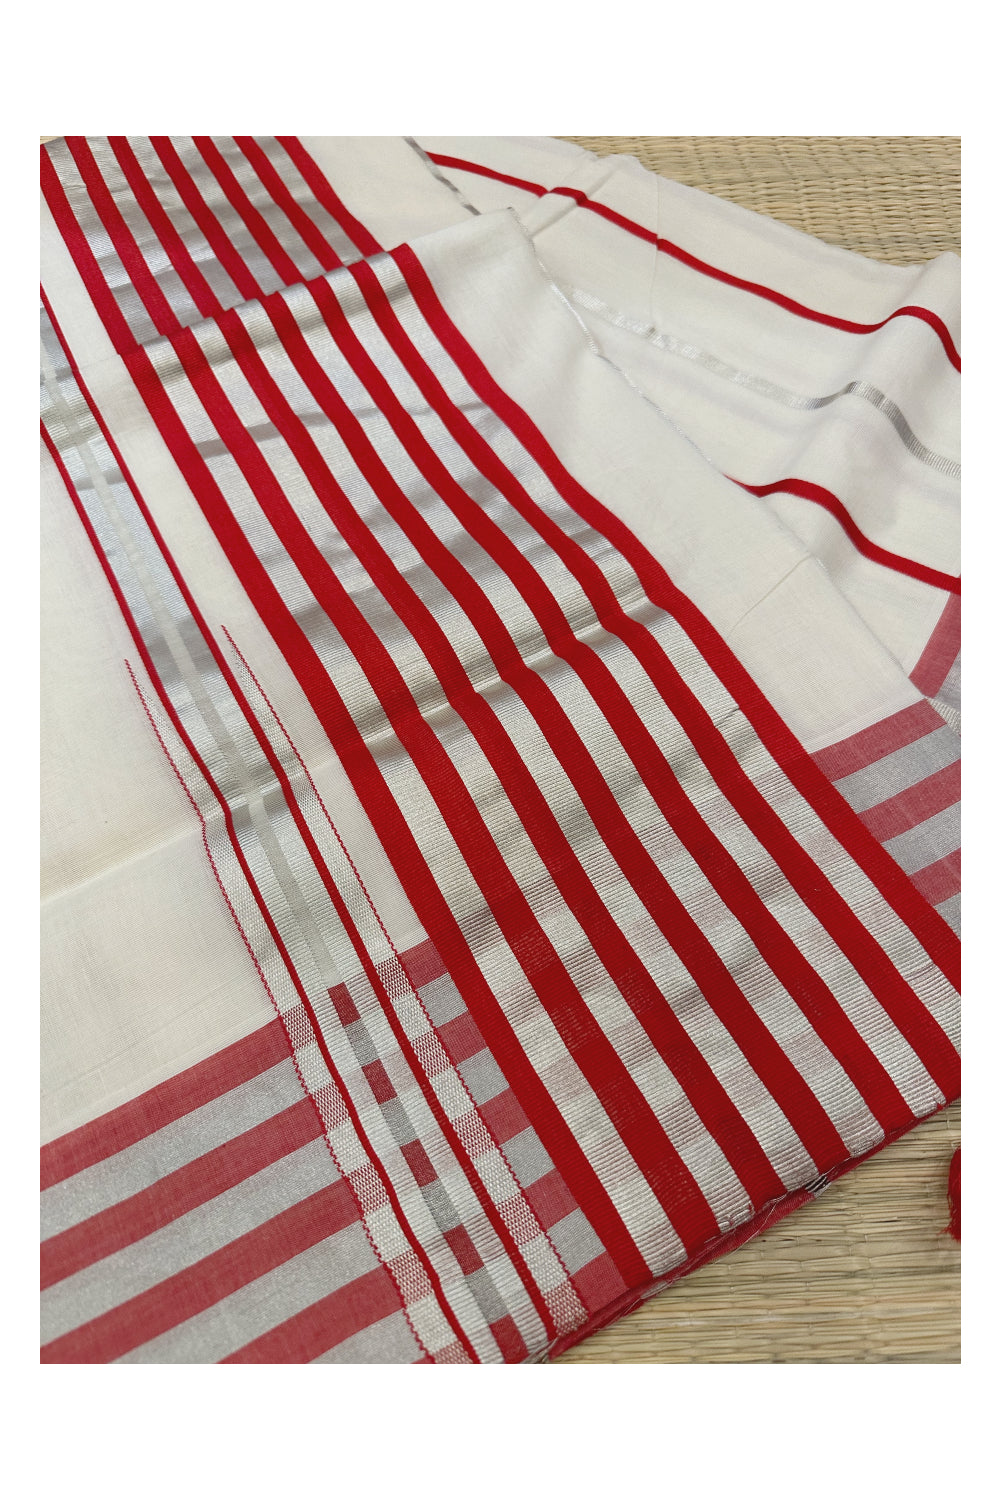 Southloom Premium Handloom Saree with Silver Kasvau and Red Lines Across Body and Lines Design Pallu